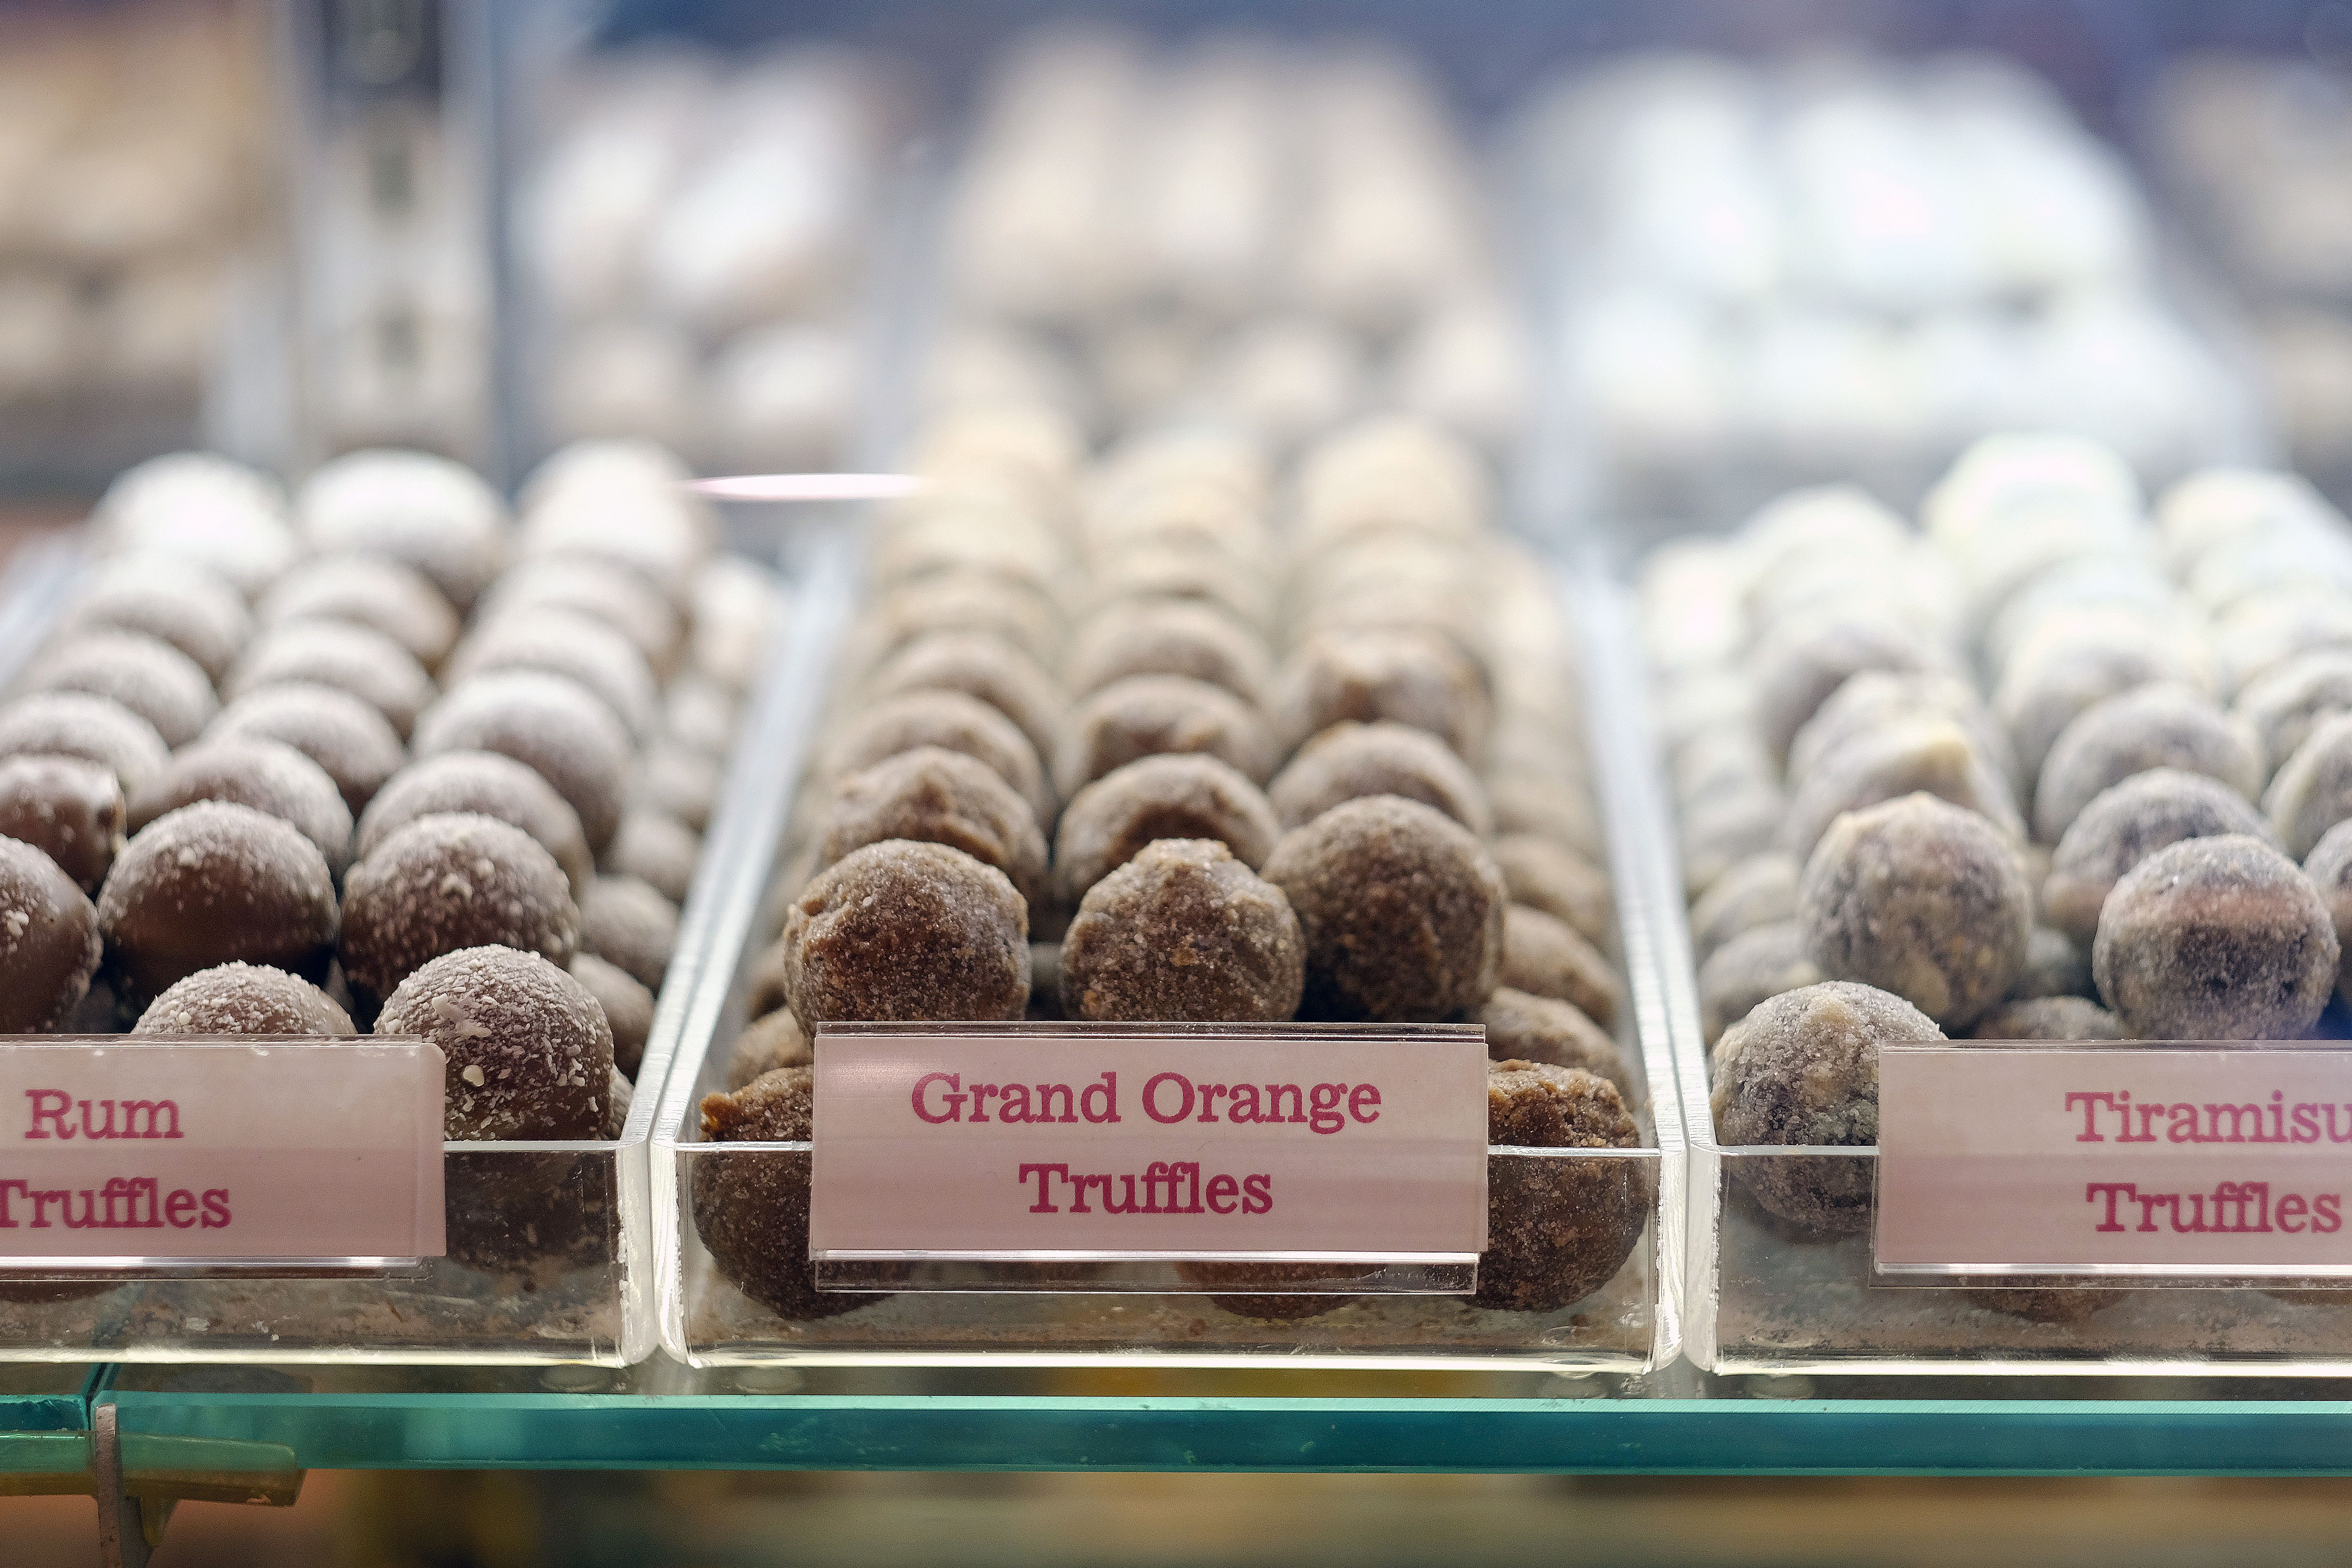 4 candy shops for sweet family field trips - The Boston Globe